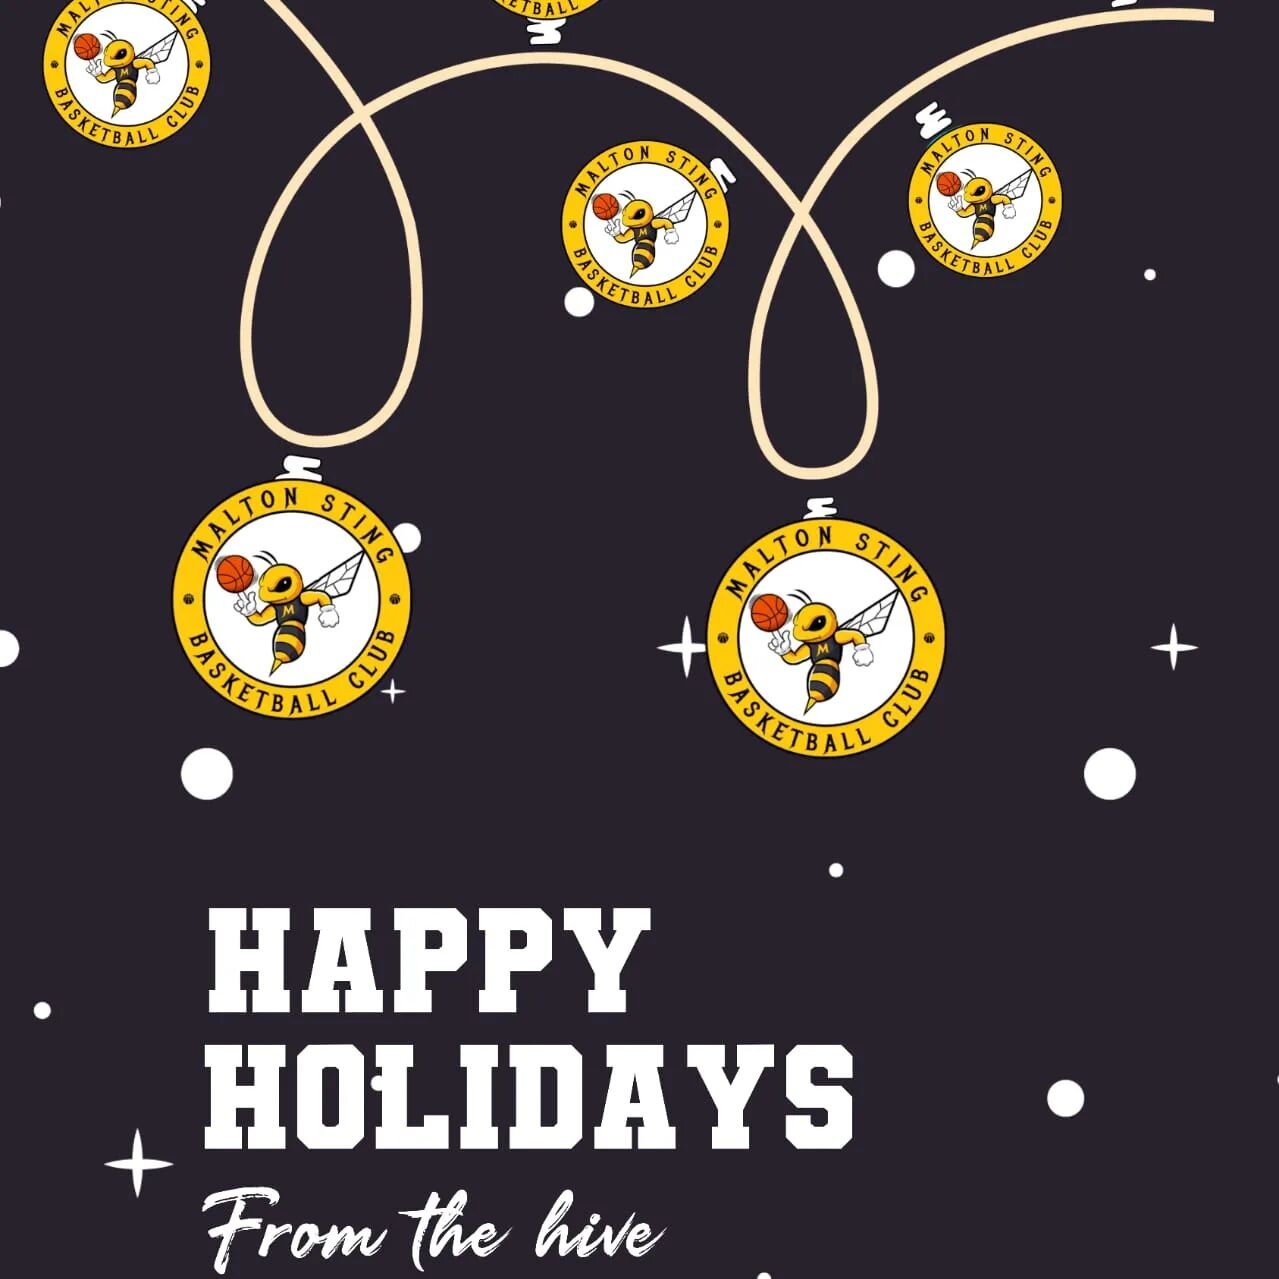 Happy Holidays and a Happy New Year ahead from our Hive to your Home !

🐝🏀❄️🐝🏀❄️🐝🏀❄️